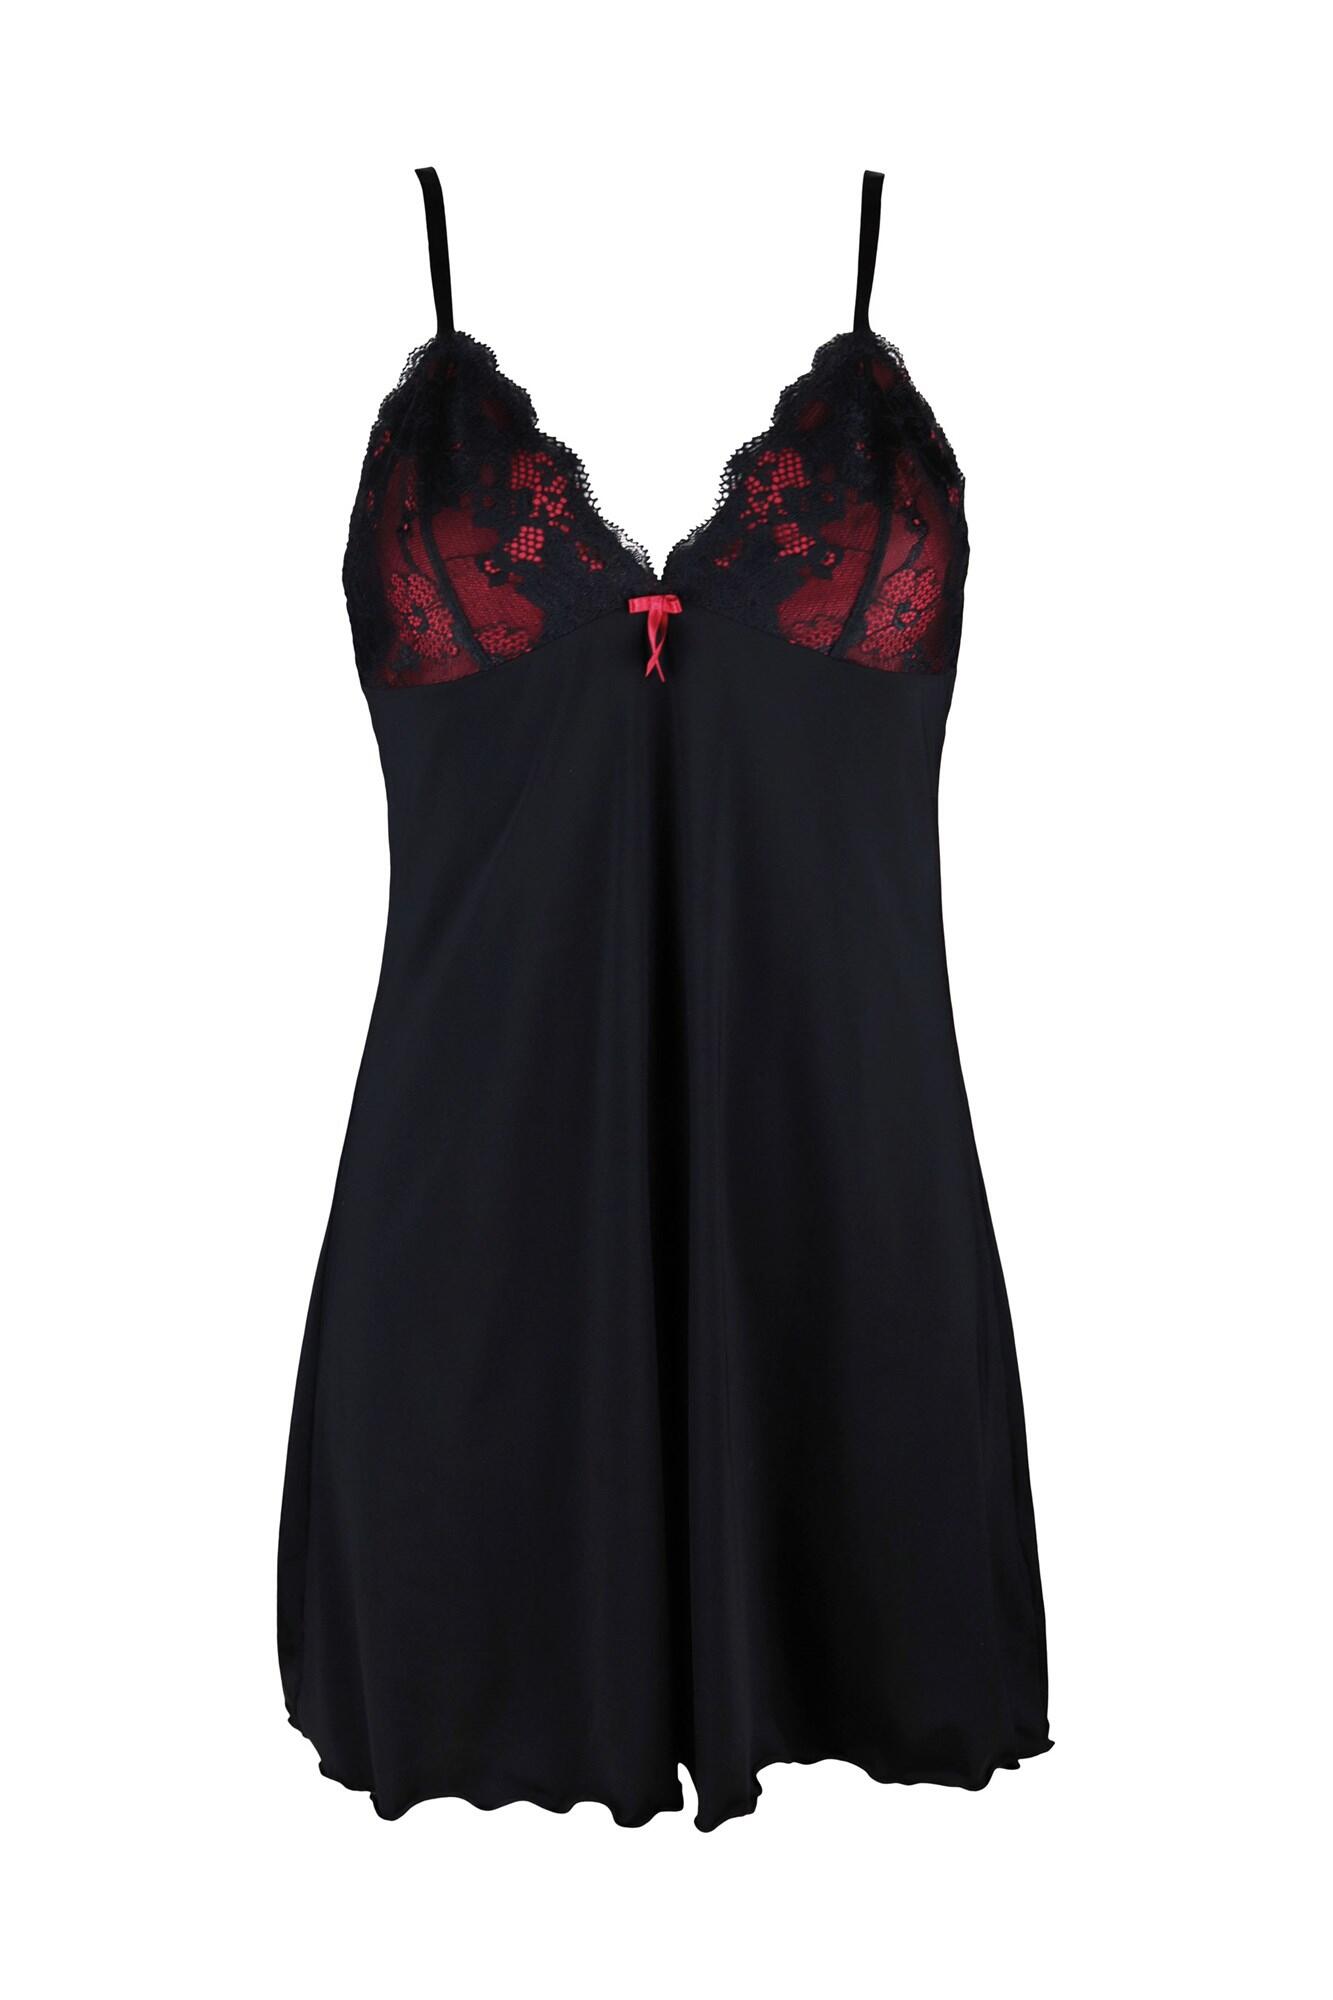 Amour Luxe Chemise in Black/Scarlet | Pour Moi Clothing